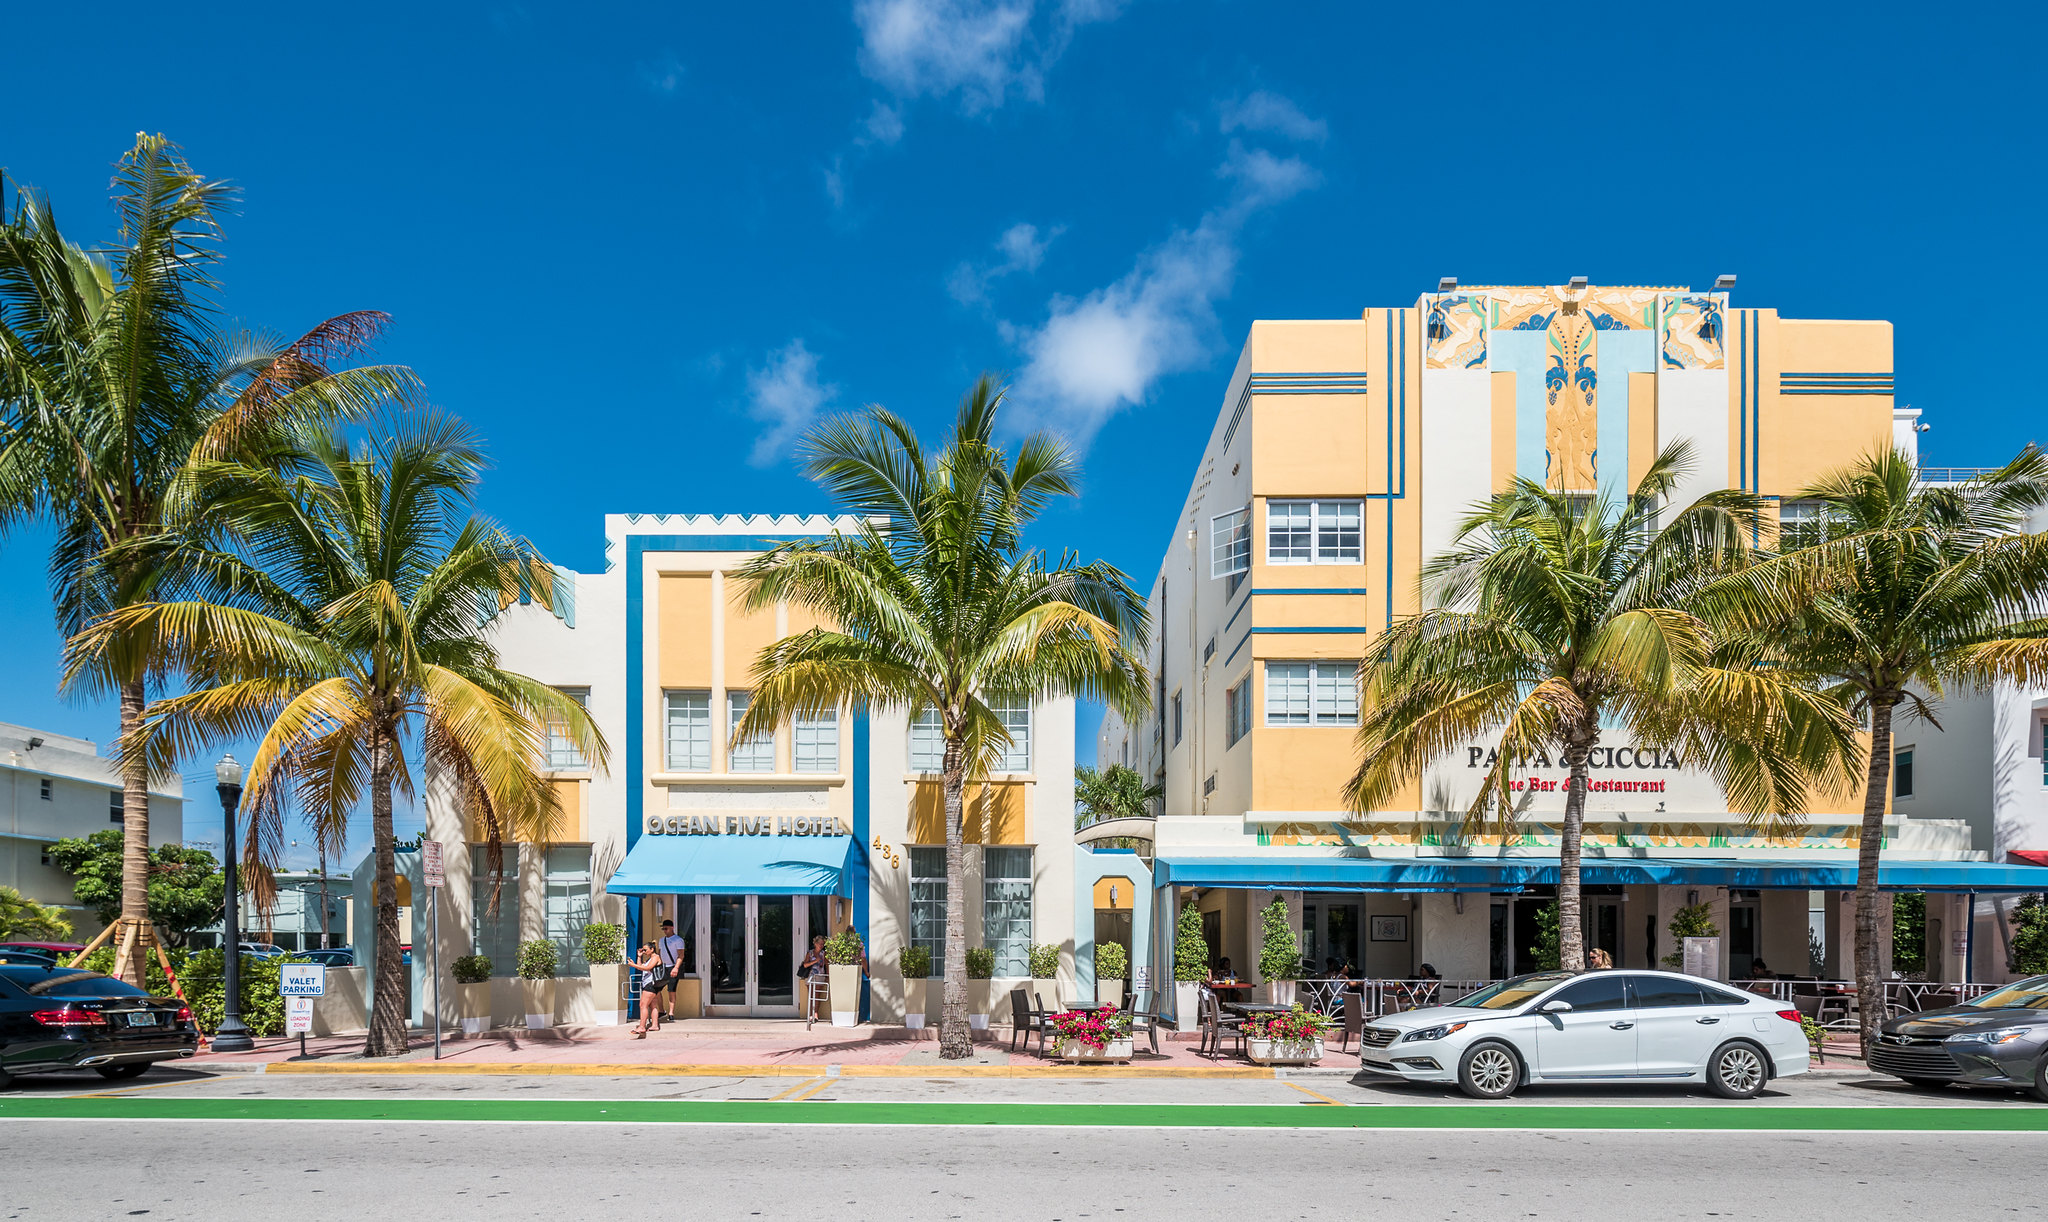 <p>Miami Beach is one of the more unique sandy destinations in Florida because it’s where you’ll find the colorful Art Deco Historic District, which features restored buildings from the 1930s and 40s.</p>